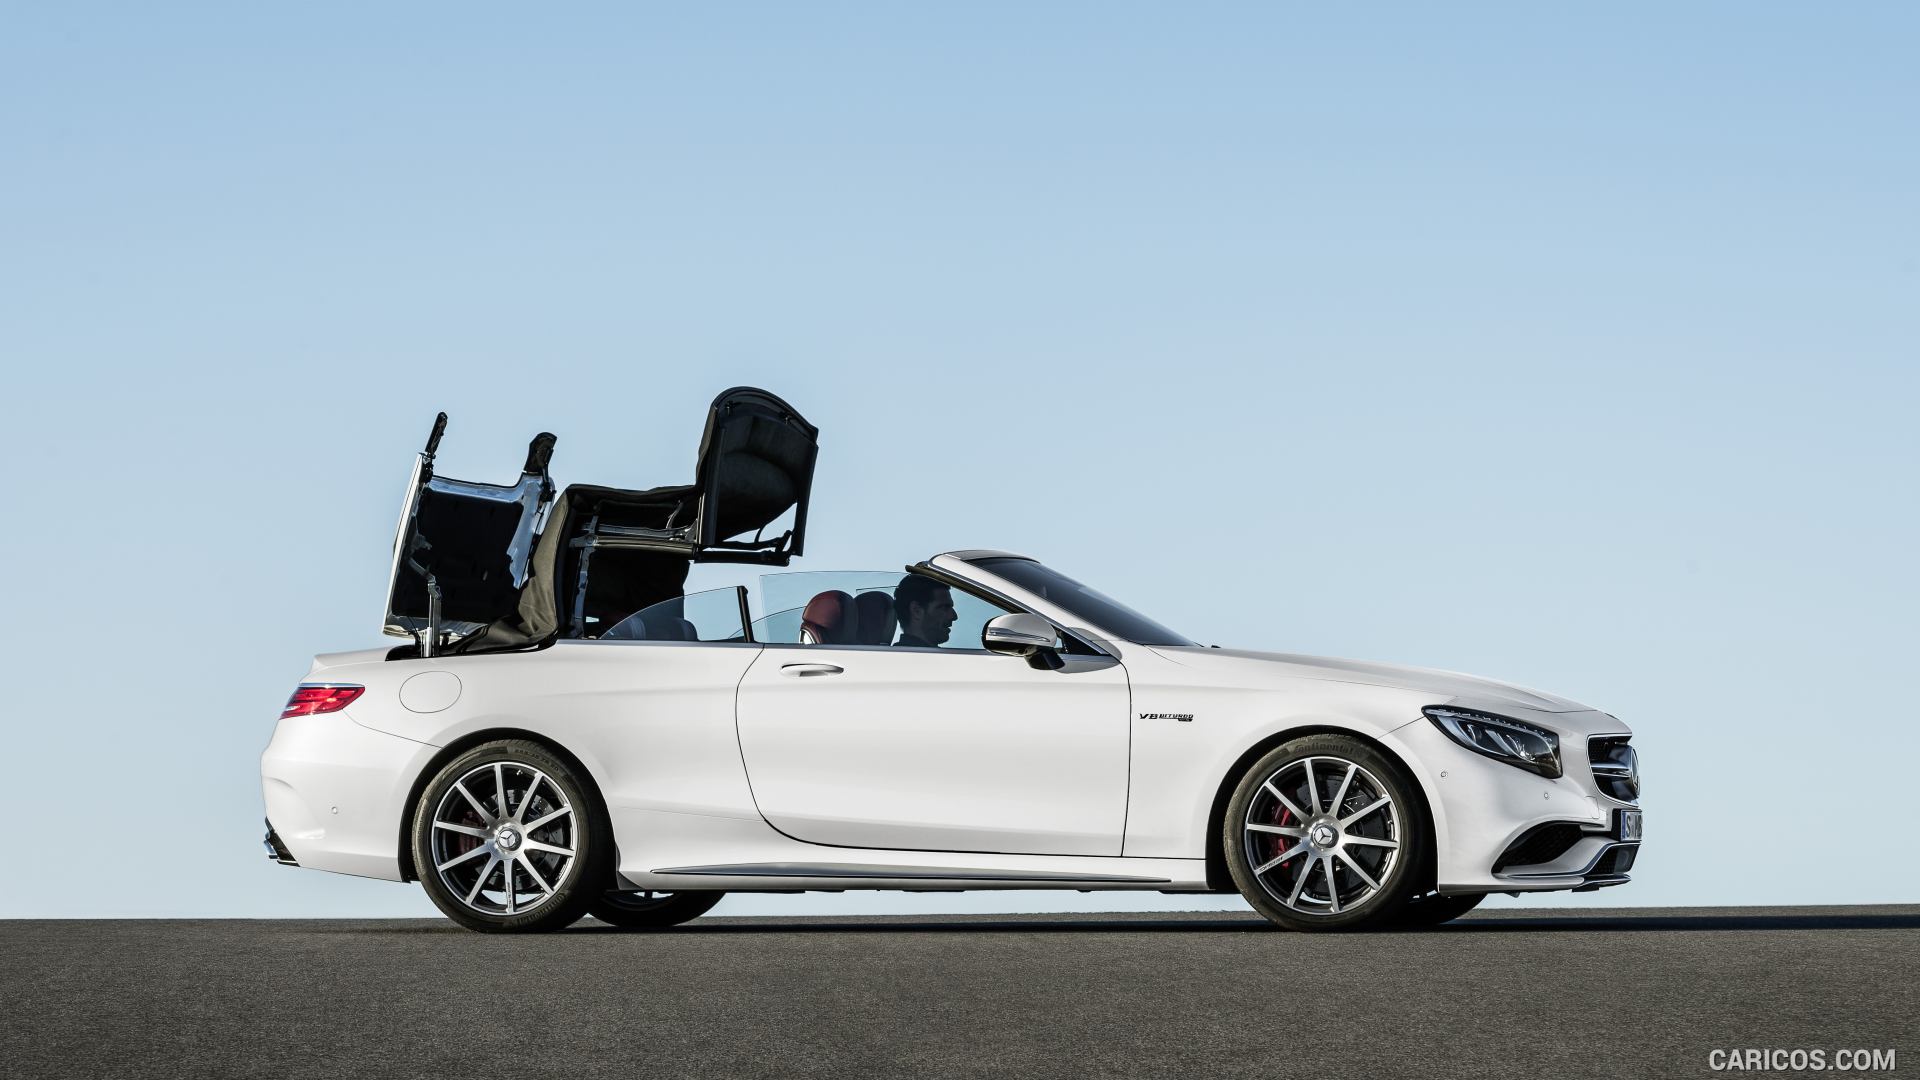 2017 Mercedes-AMG S63 4MATIC Cabriolet (Designo Diamond White Bright) - Top In Action, #18 of 65